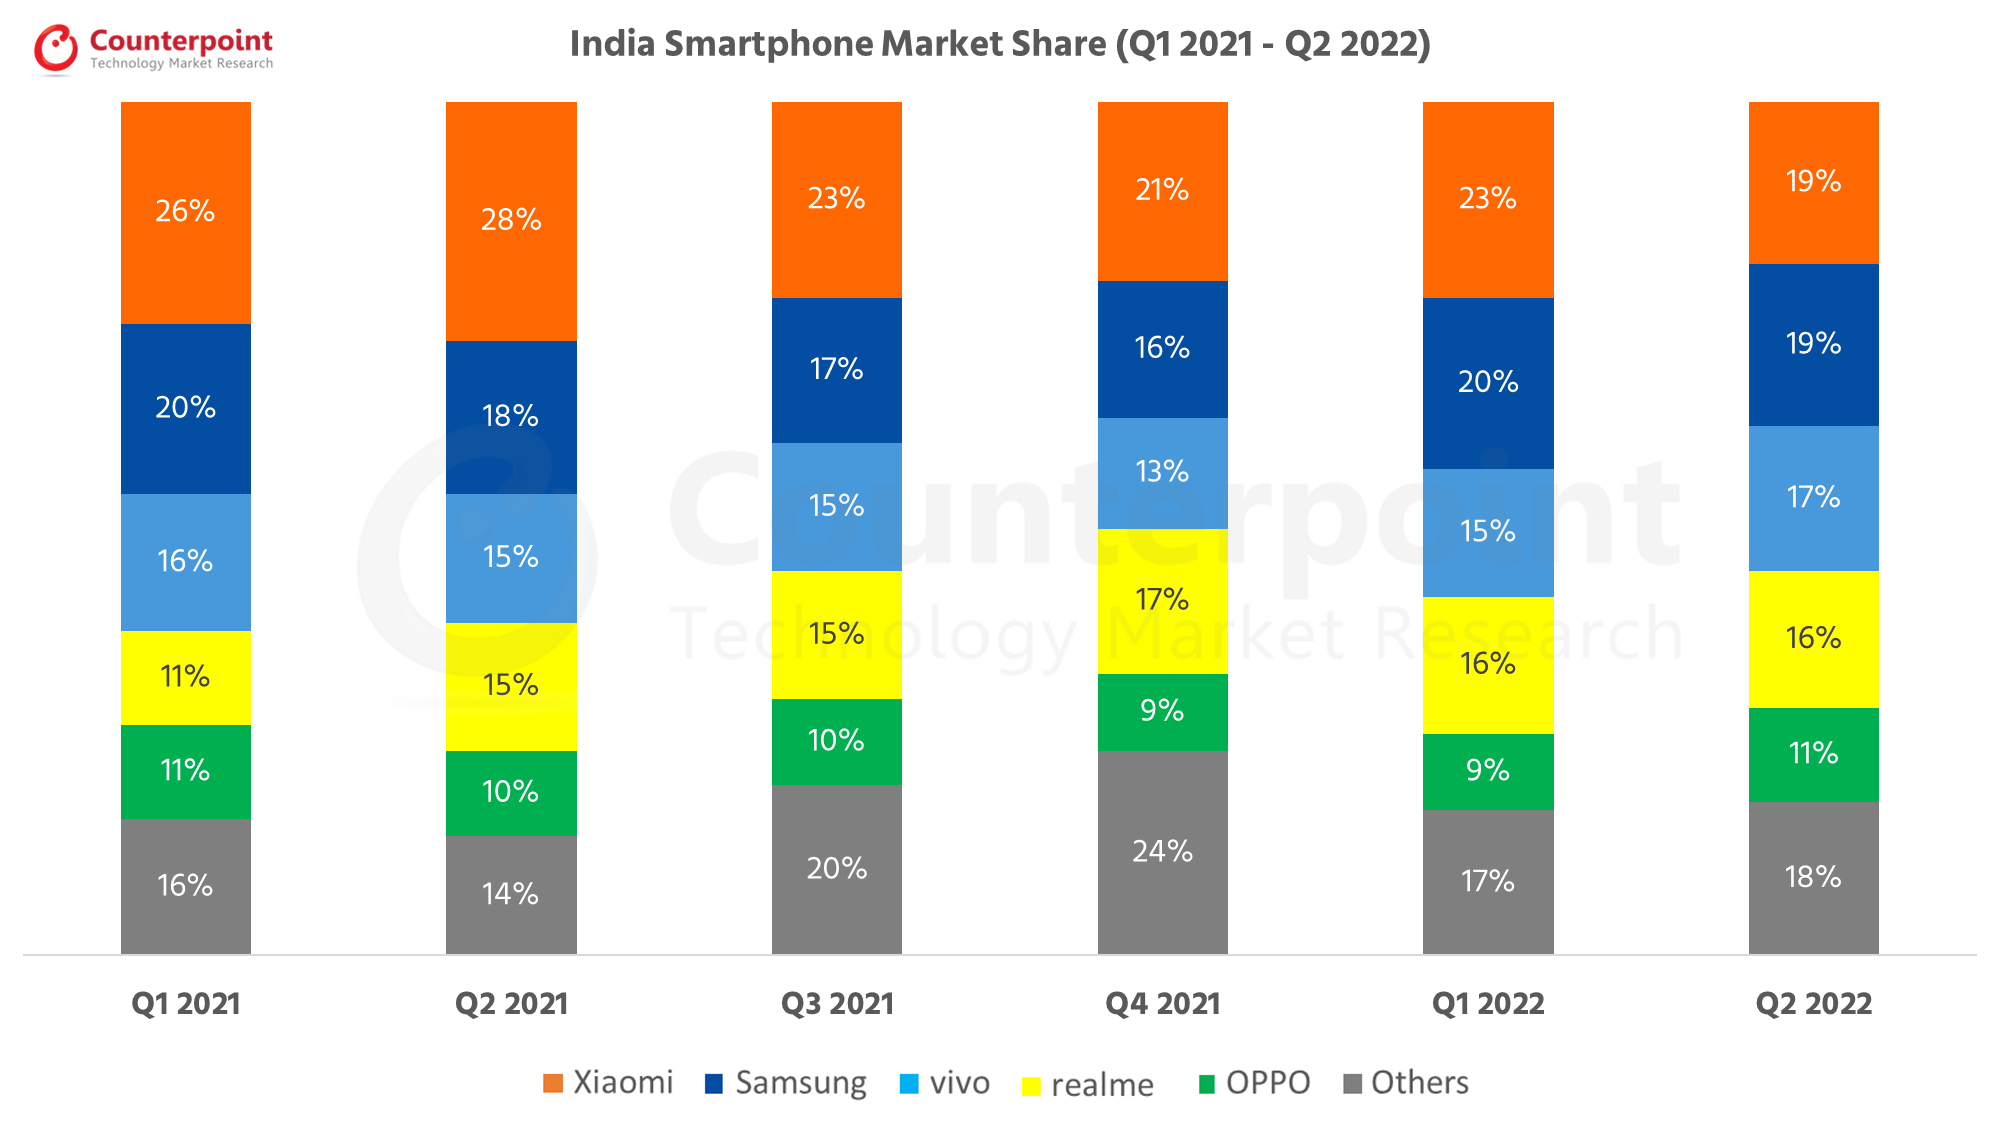 Counterpoint Research India Smartphone Market Q2 2022